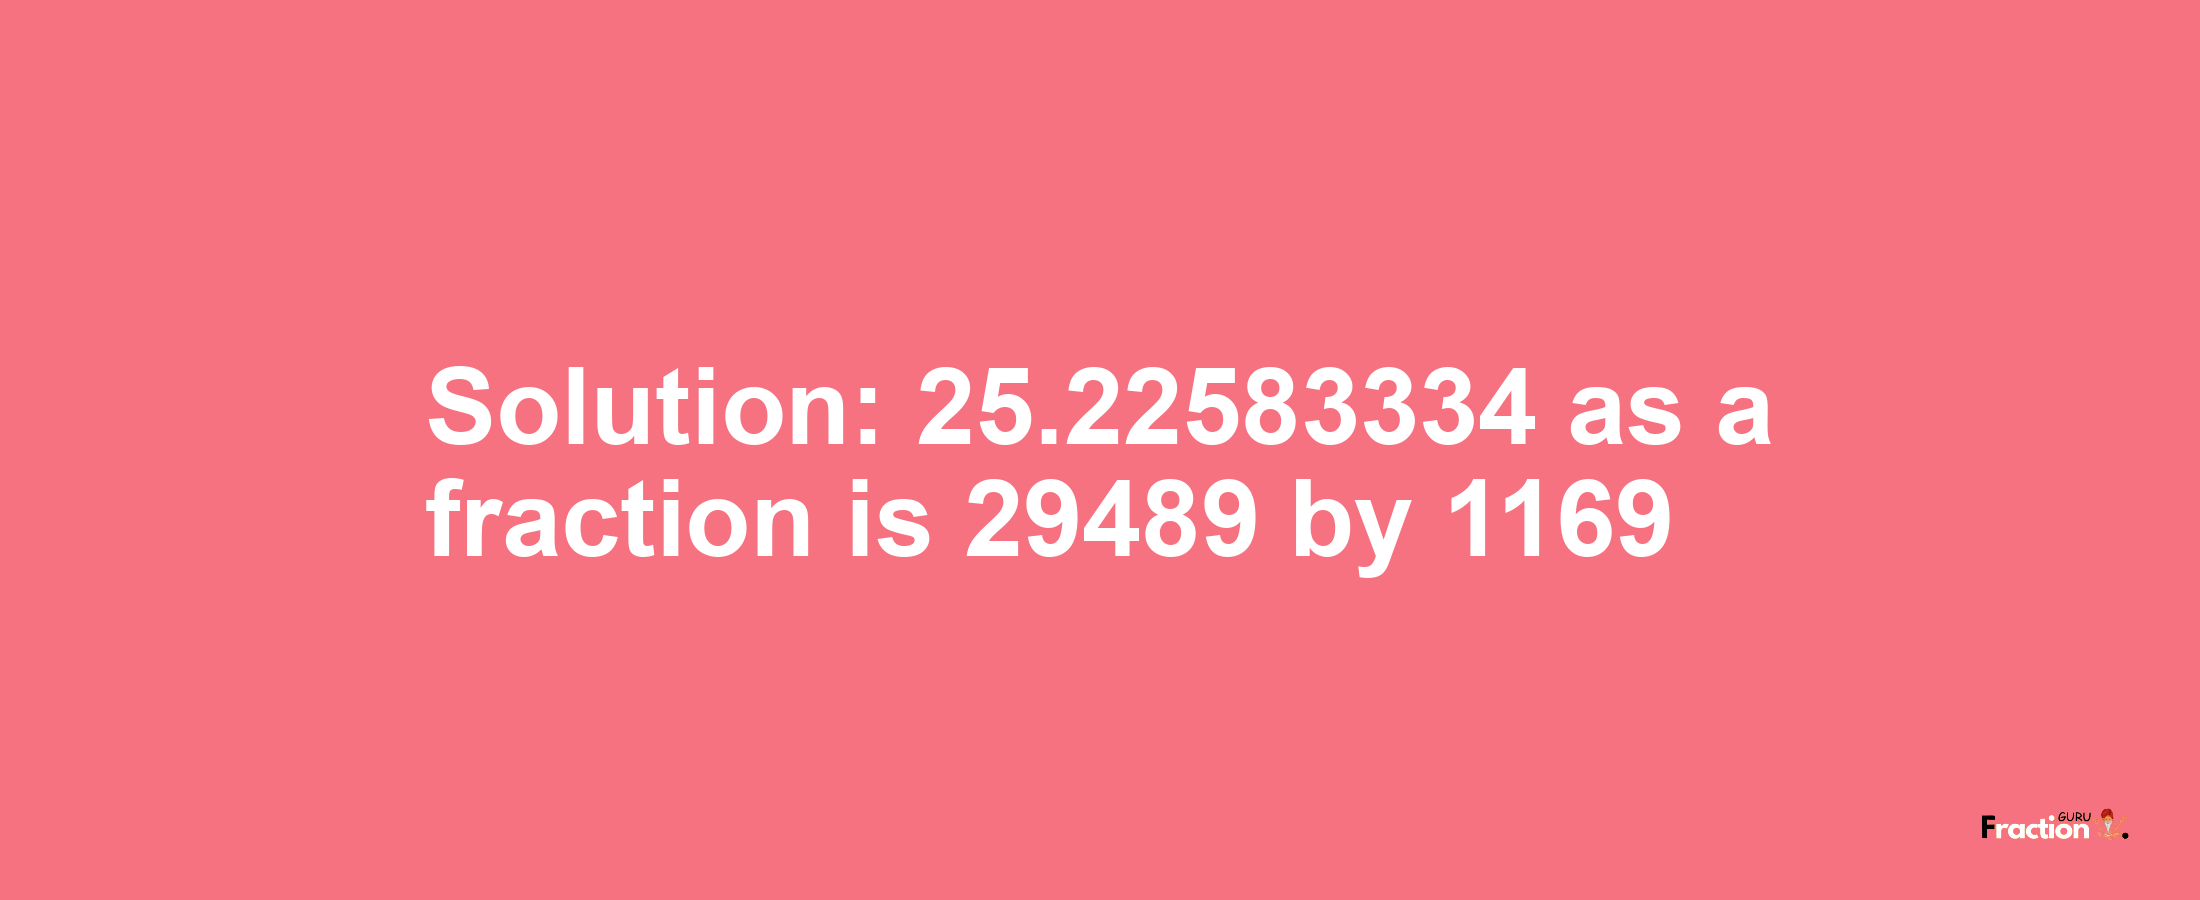 Solution:25.22583334 as a fraction is 29489/1169